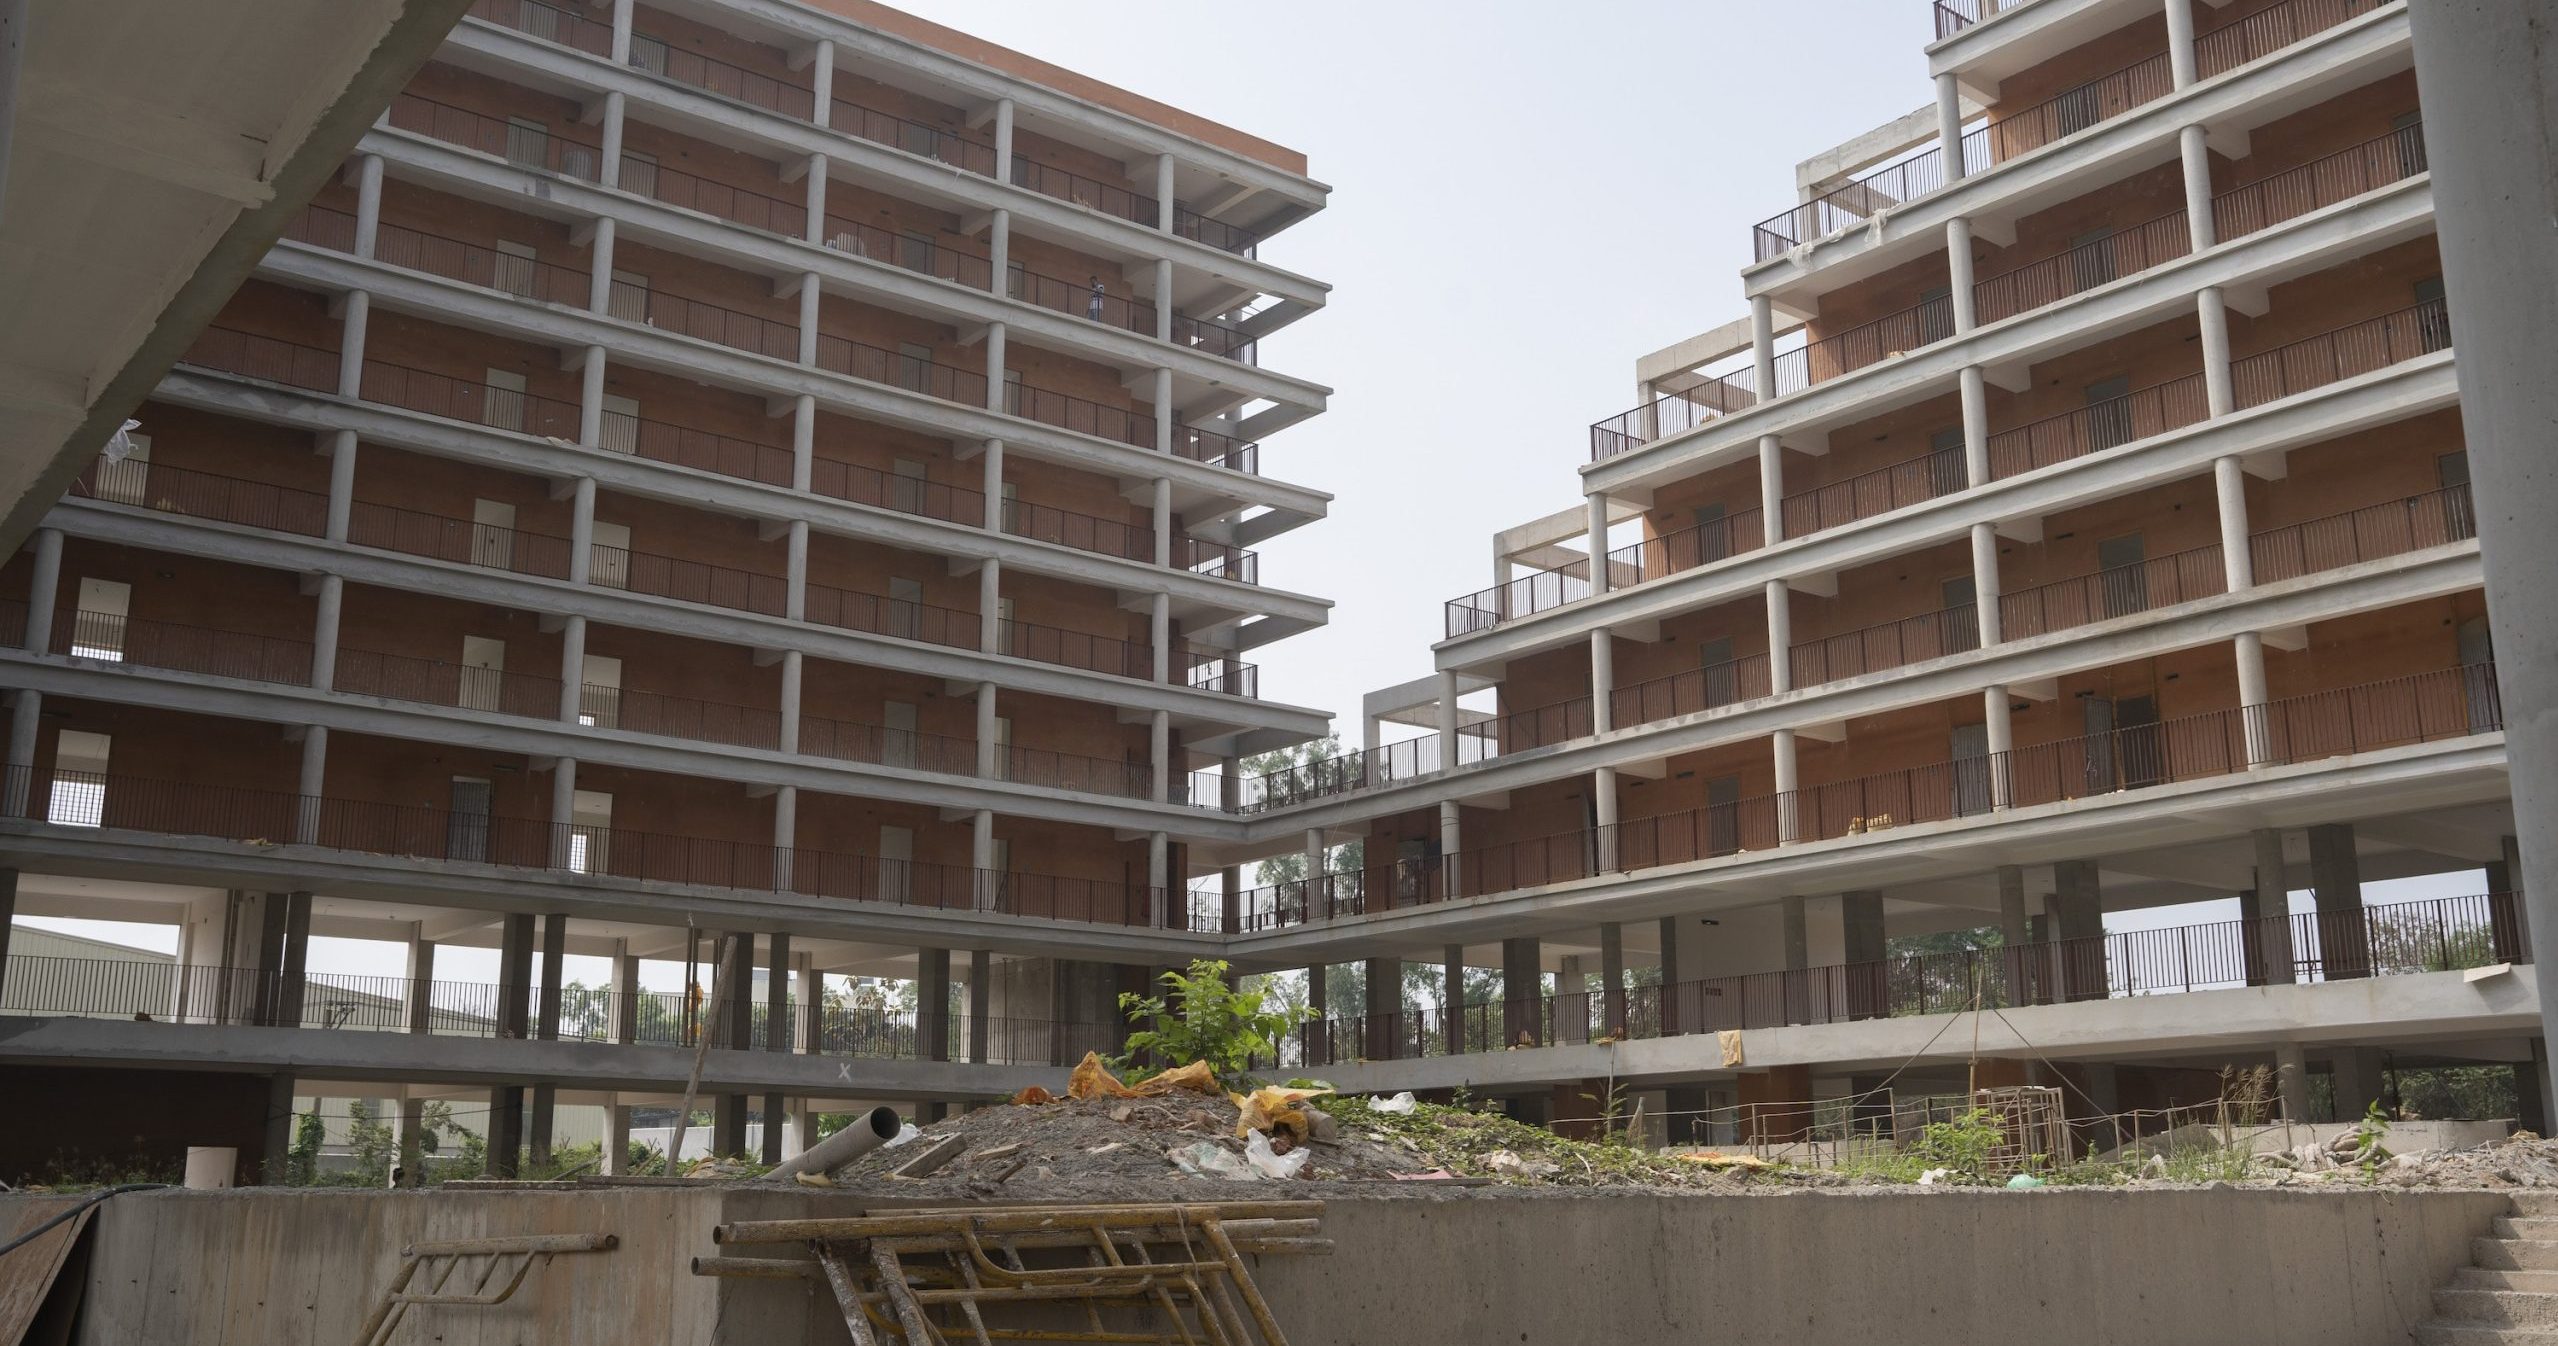 Bangladesh built a tech park for 100,000 workers. Now it’s a ghost town